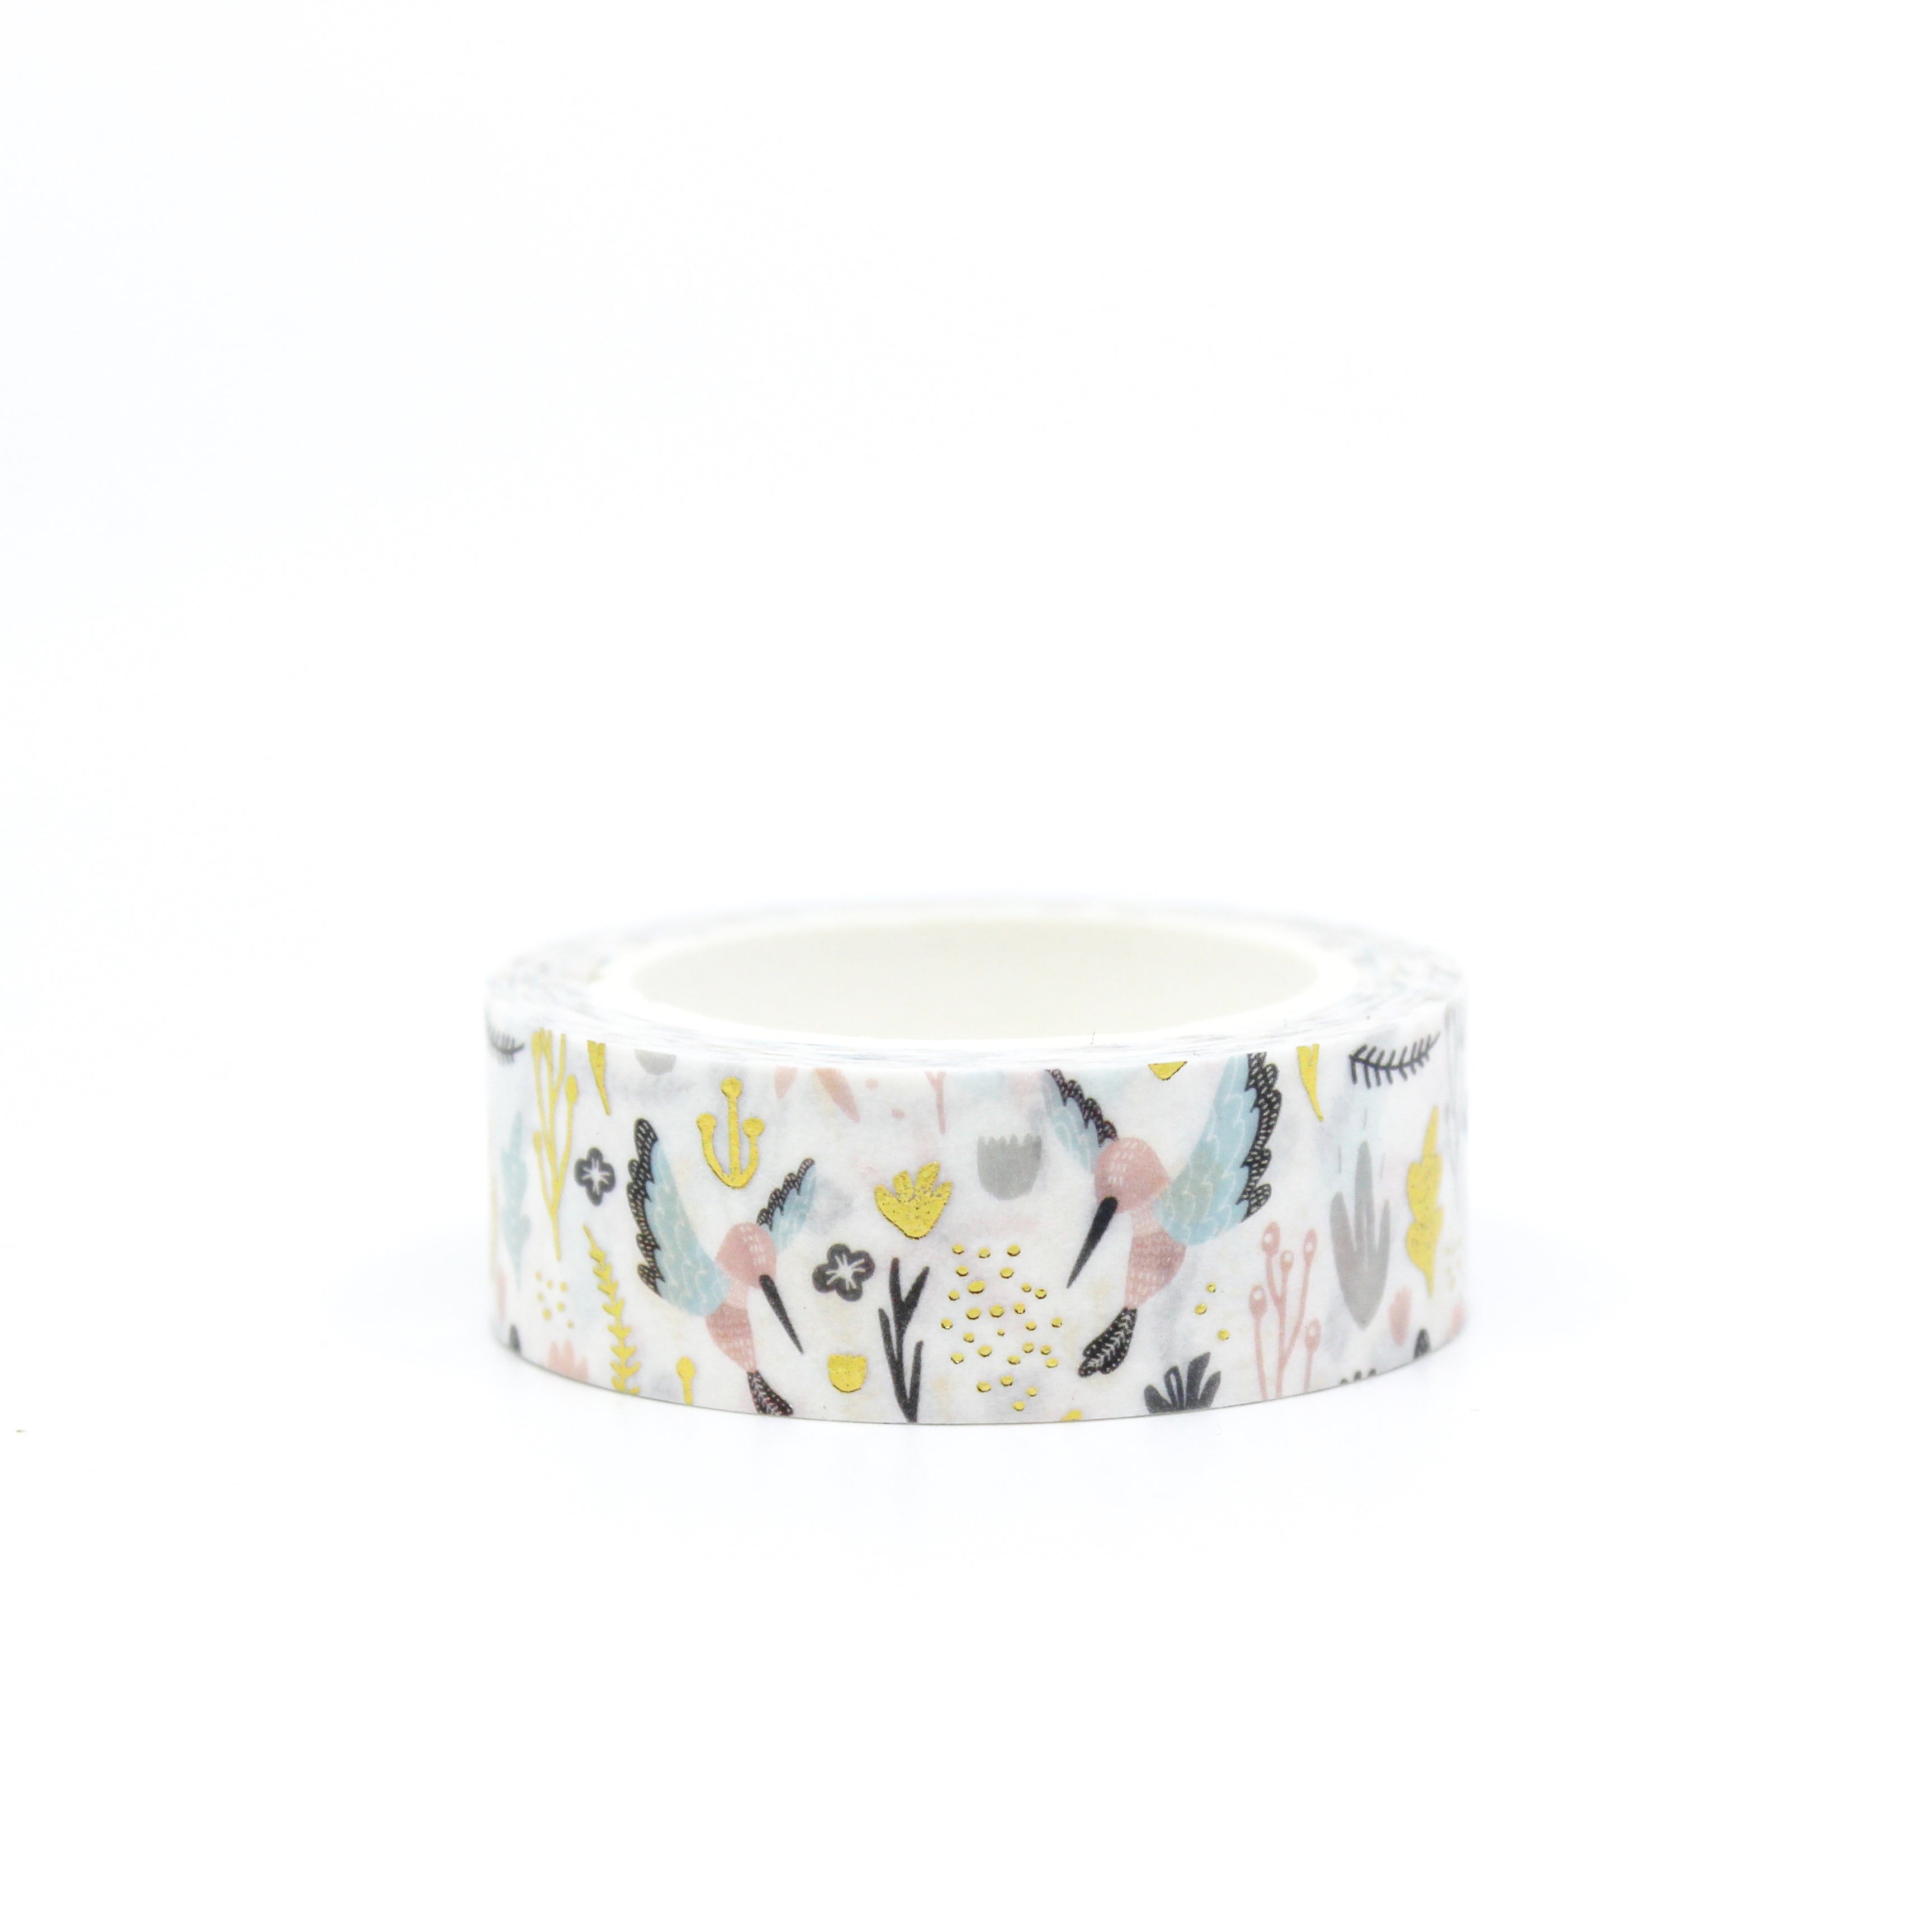 Embark on a whimsical journey with our fairytale hummingbird washi tape, featuring delicate hummingbirds amidst an enchanted backdrop of flowers and magical elements. This tape is sold at BBB Supplies Craft Shop.